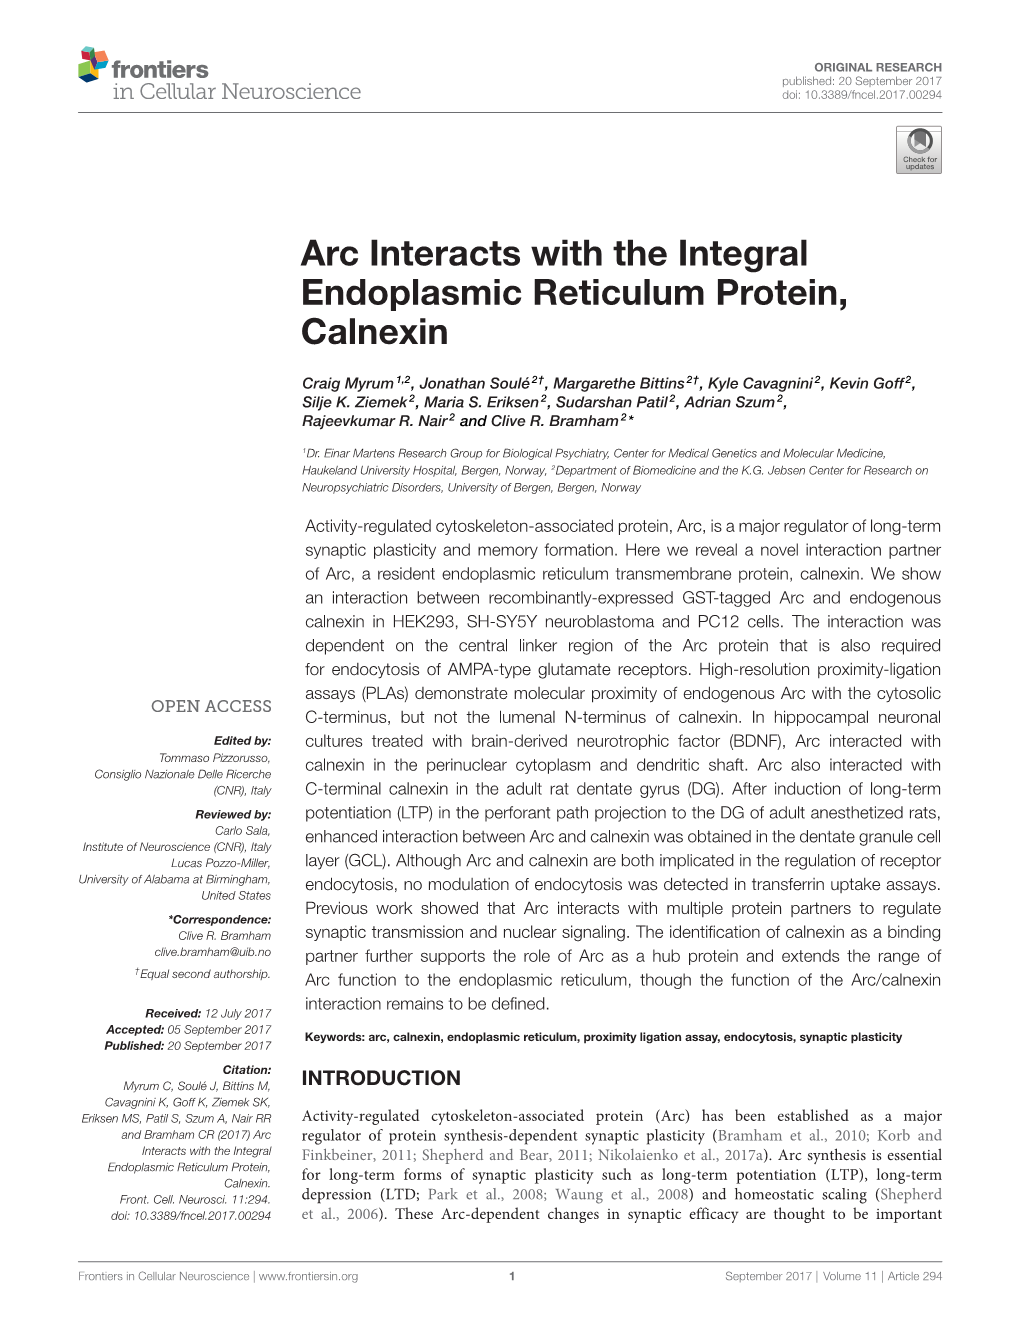 Arc Interacts with the Integral Endoplasmic Reticulum Protein, Calnexin